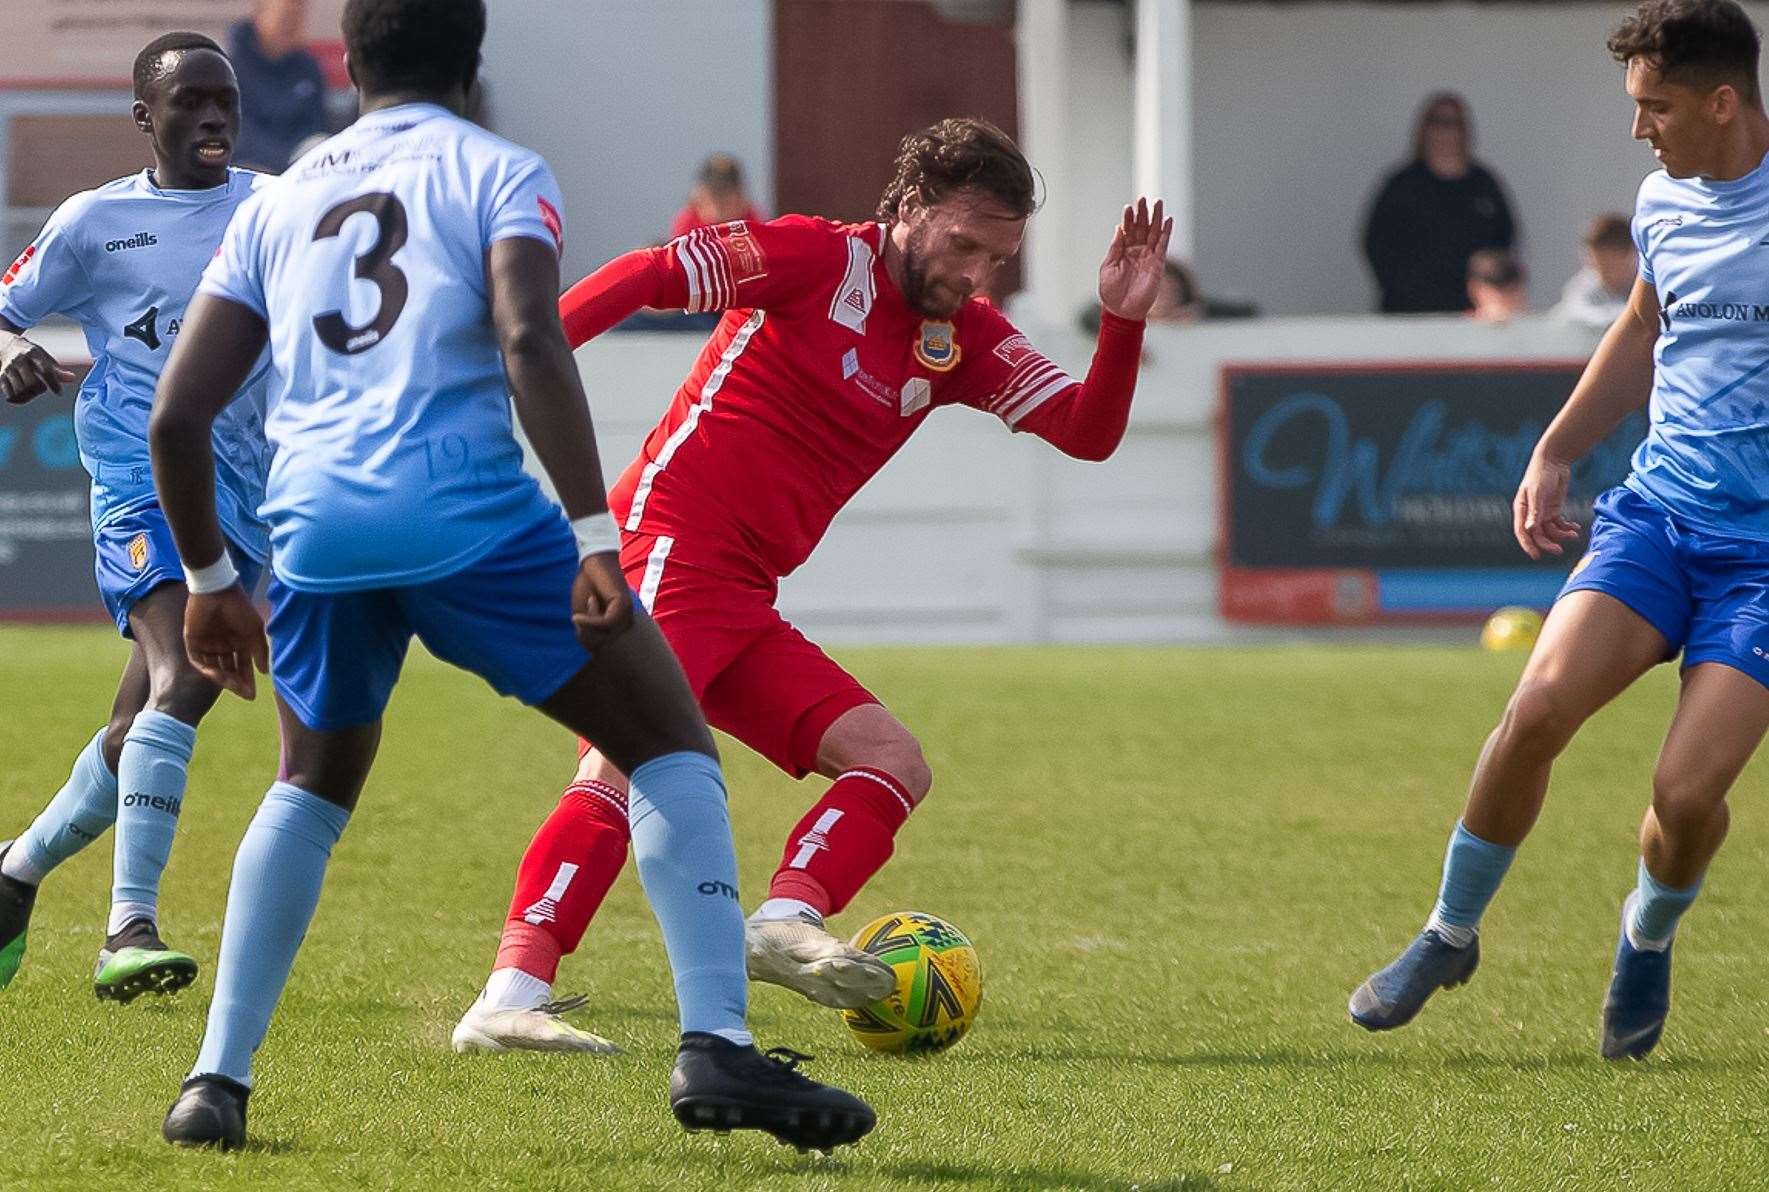 Player-manager Andy Drury turns with the ball. Picture: Les Biggs